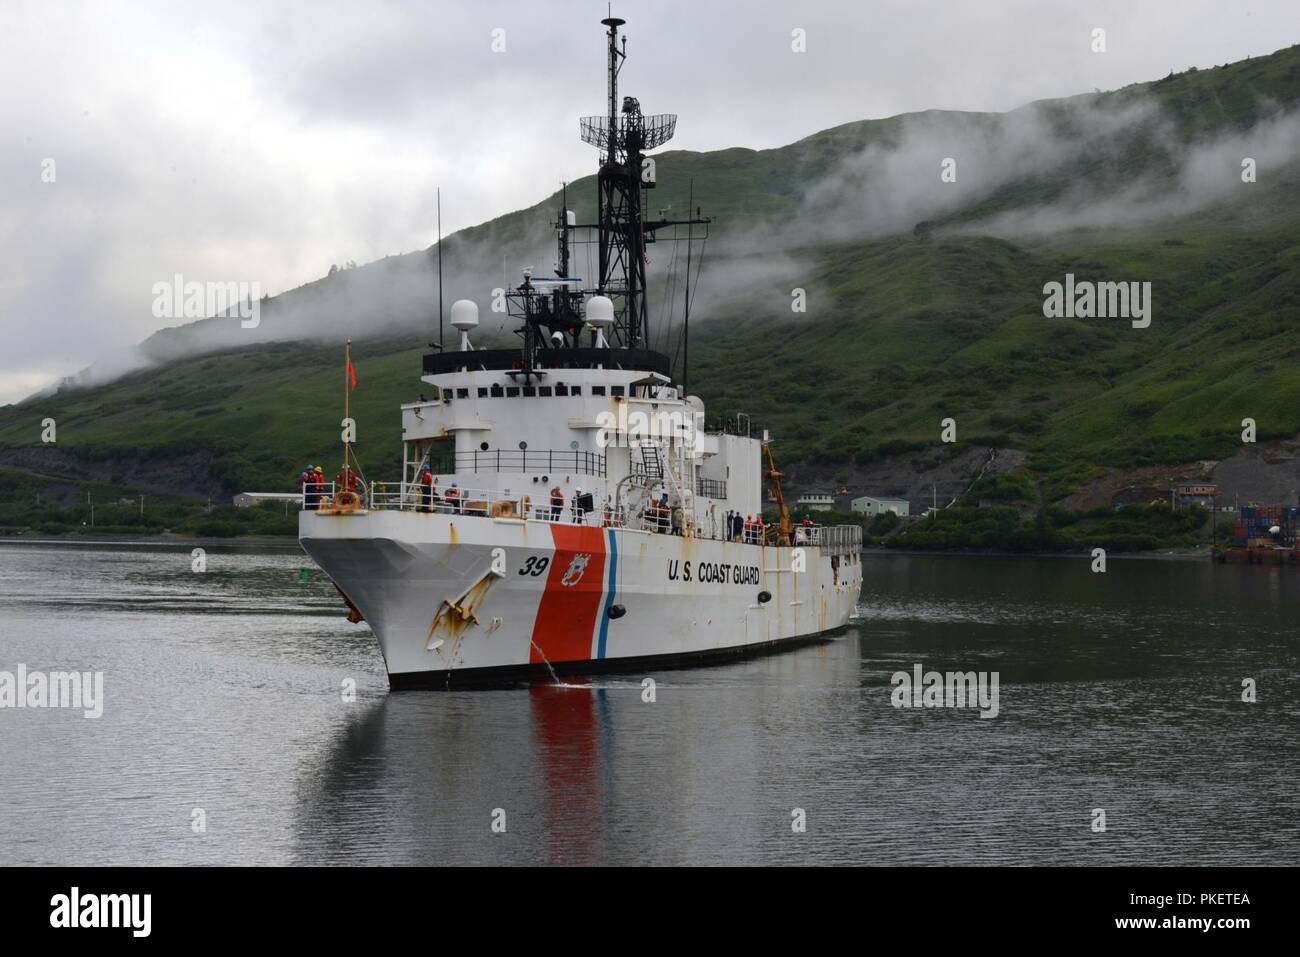 The Coast Guard Cutter Alex Haley (WMEC 39) returns to its homeport in Kodiak, Alaska, August 1, 2018. The crew members completed a 90-day deployment, patrolling more than 16,000 miles throughout the Pacific Ocean. U.S. Coast Guard Stock Photo